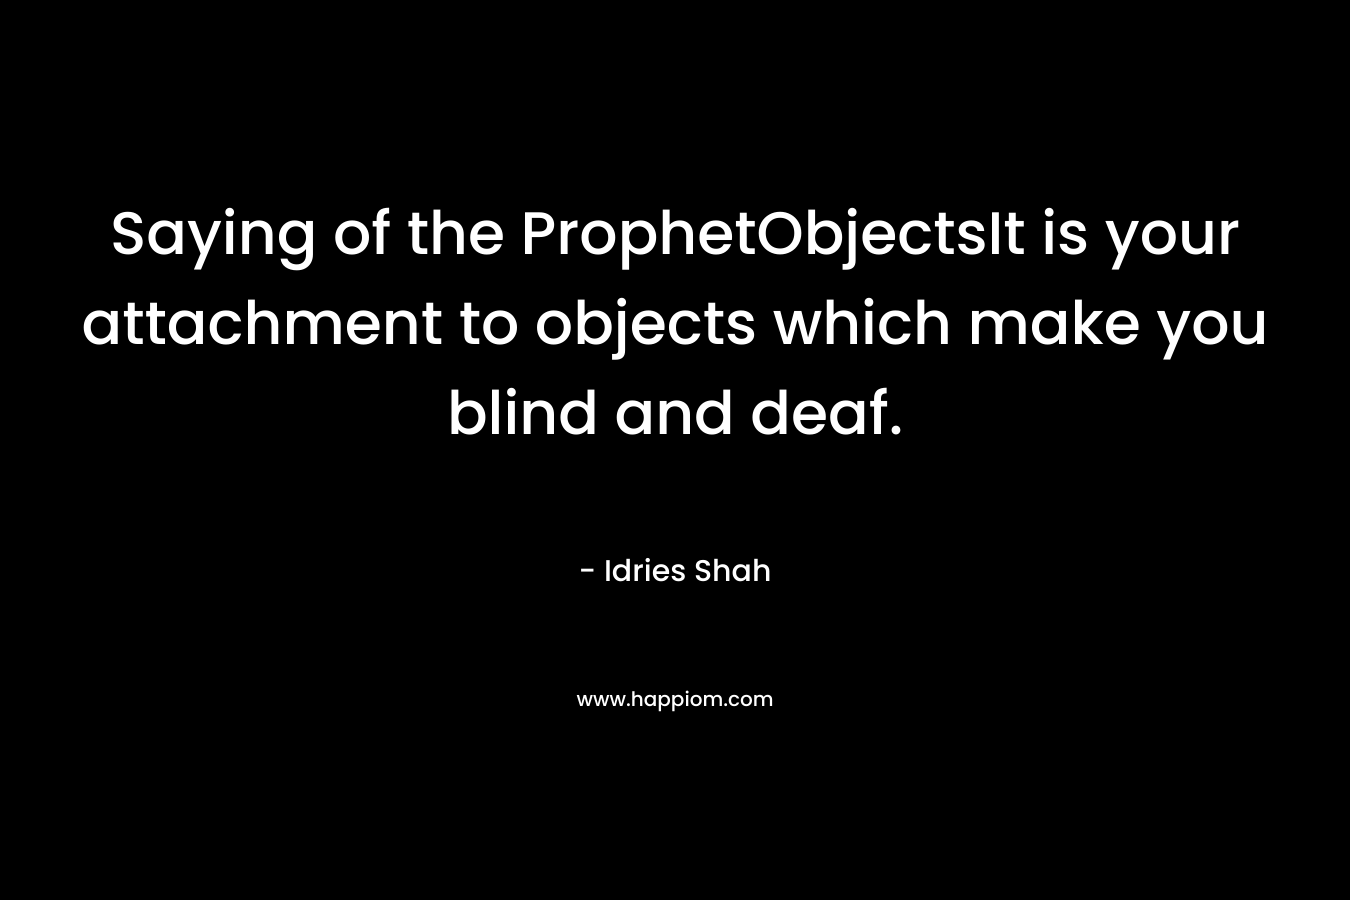 Saying of the ProphetObjectsIt is your attachment to objects which make you blind and deaf.